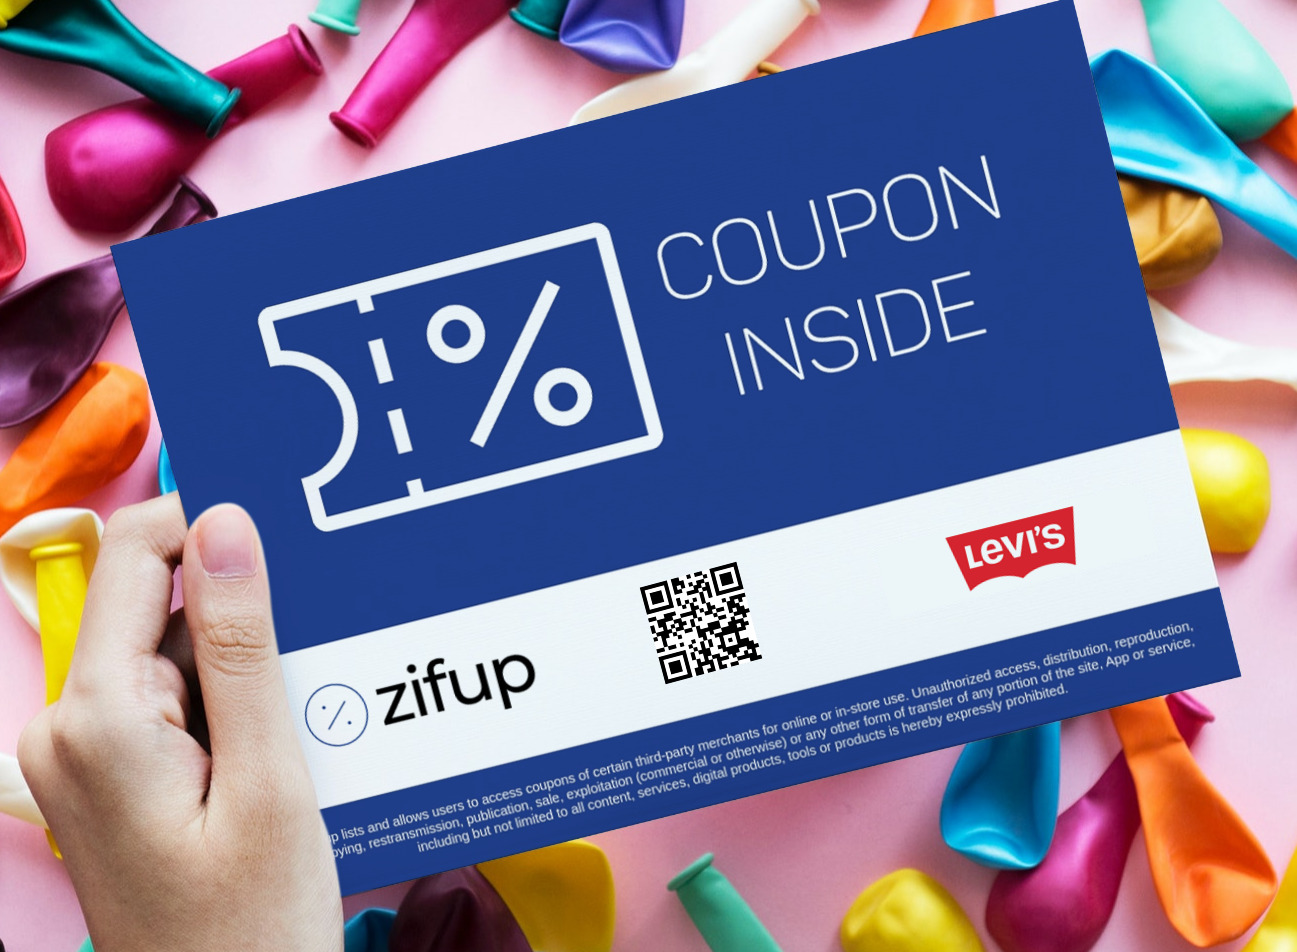 Levi's Coupons and Offers for April 2023 | Zifup